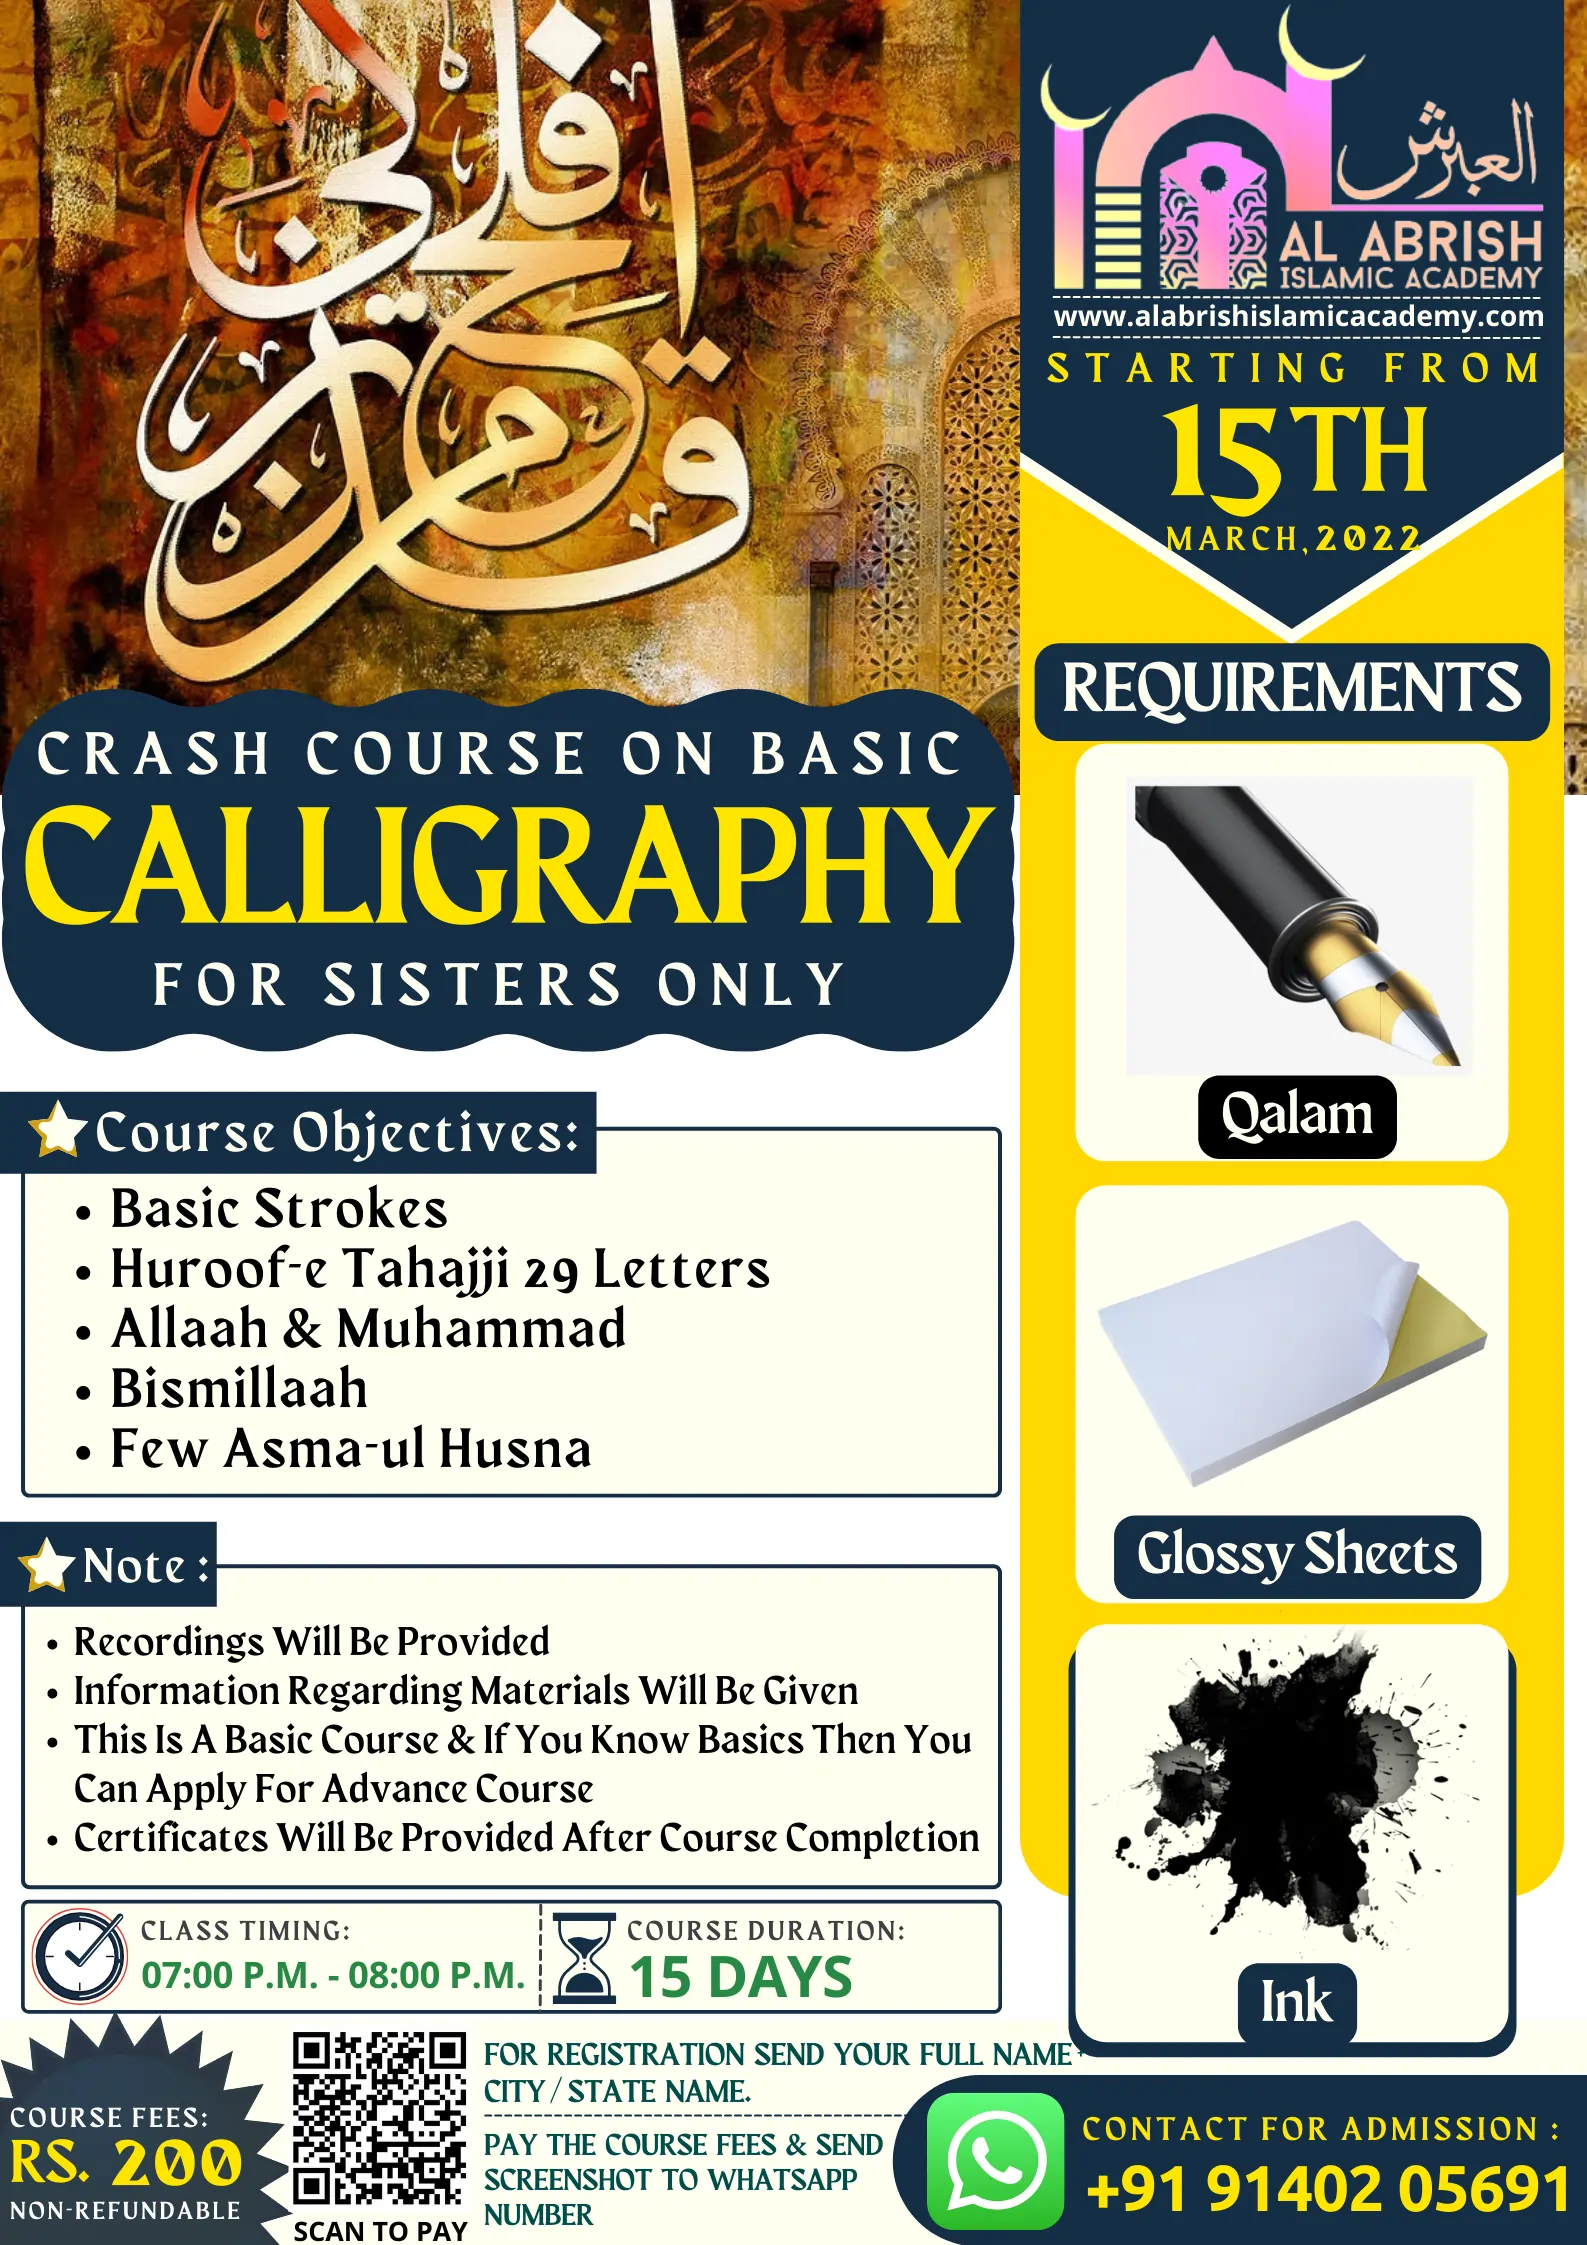 Crash Course On Basic Calligraphy For Sisters Only